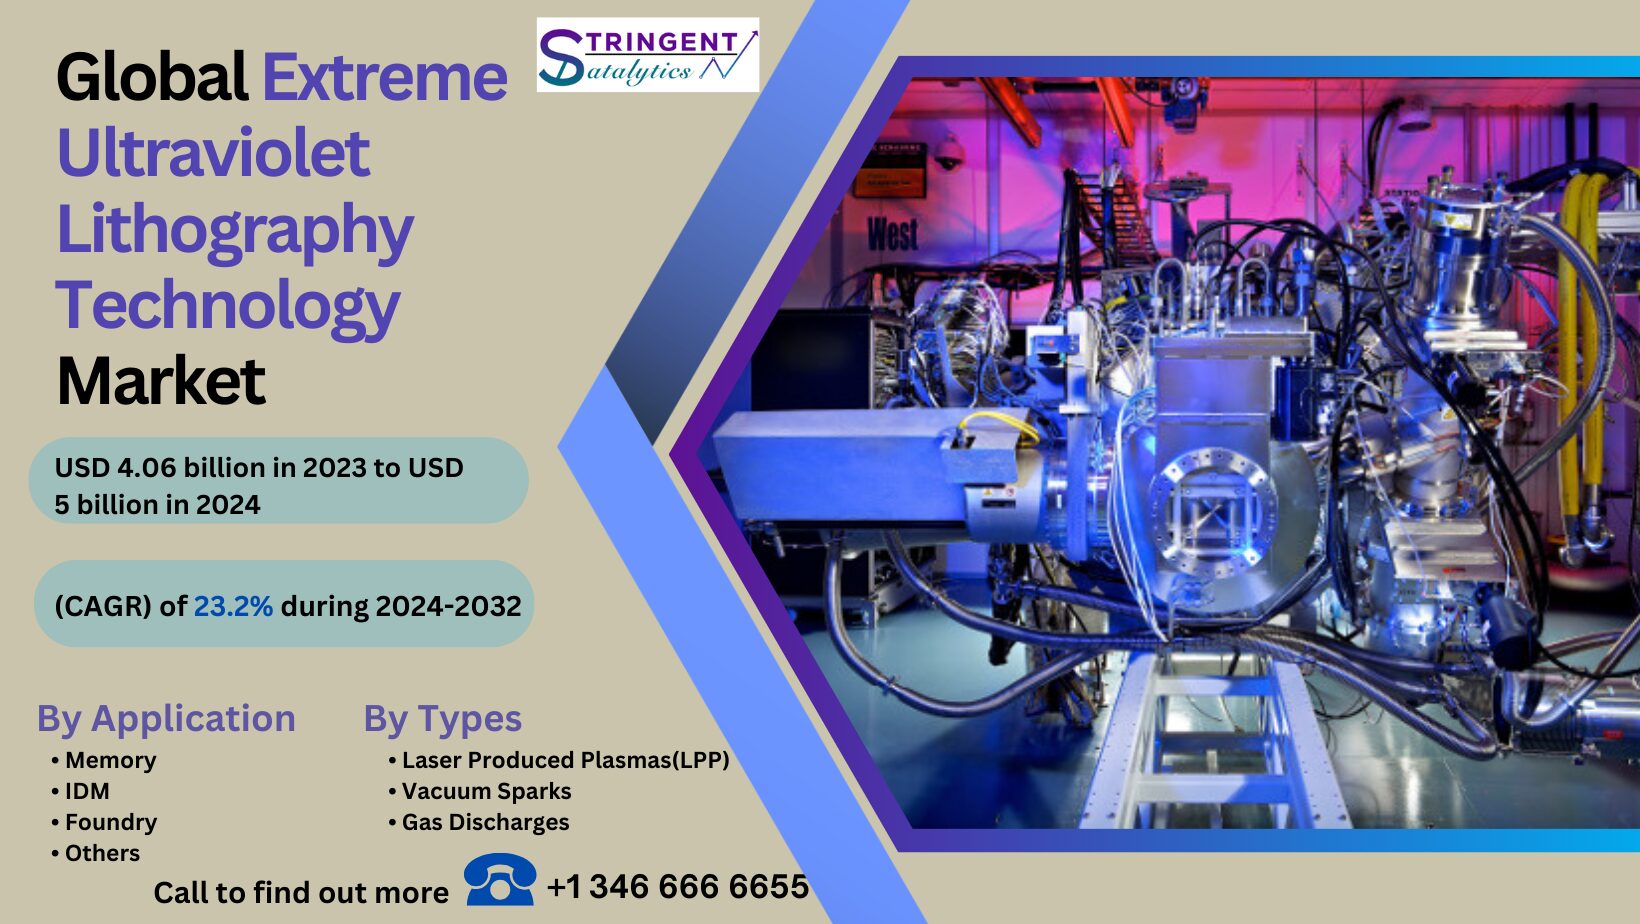 Global Extreme Ultraviolet Lithography Technology Market In-depth Insights Strategies and Huge Demand, Competitive Landscape and Qualitative Analysis, Latest Technological Developments by 2033